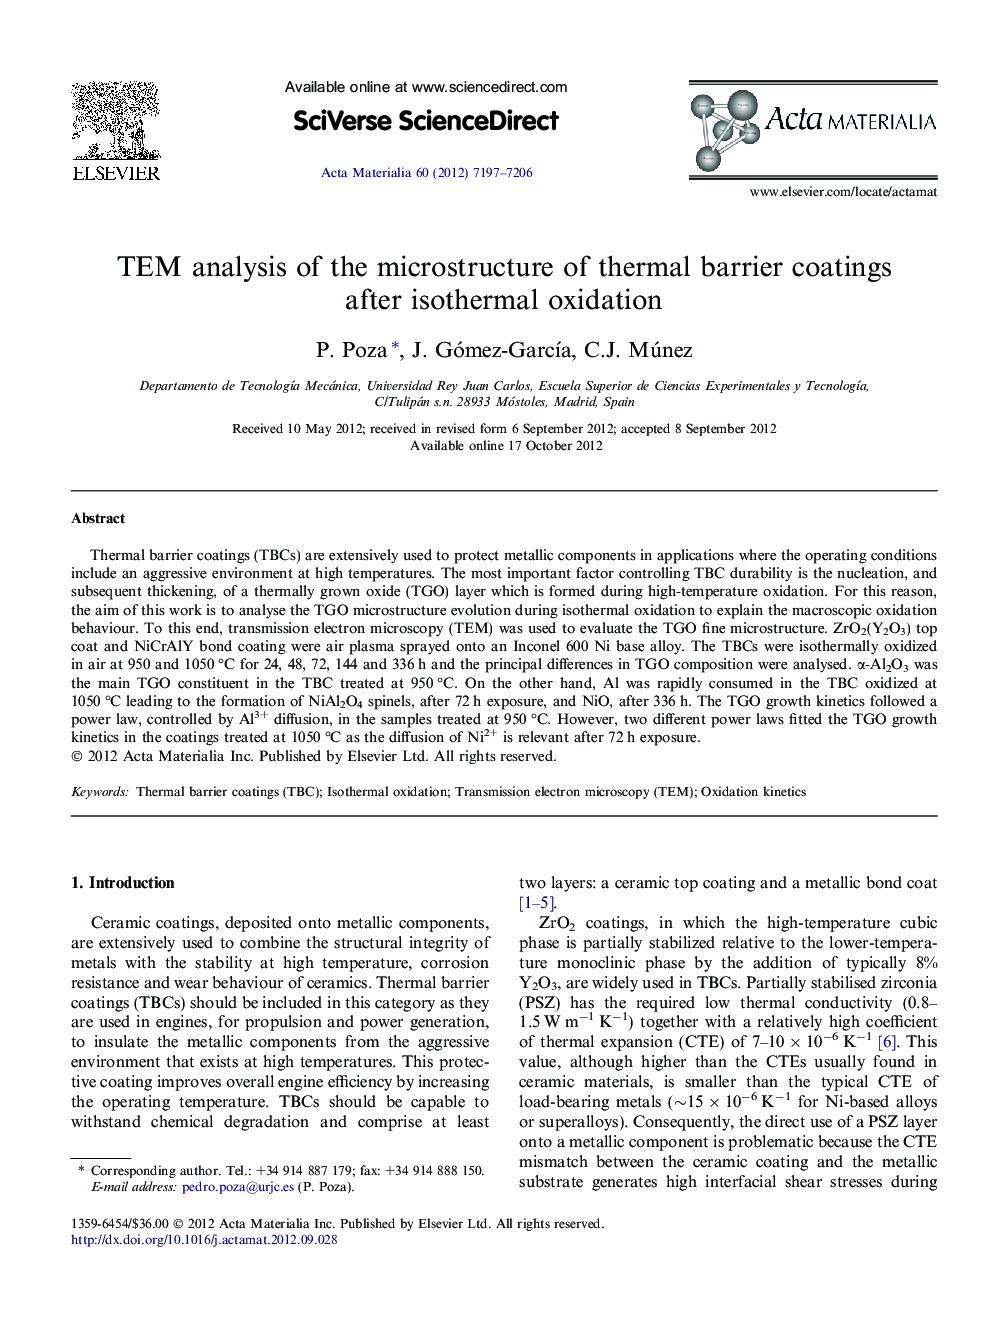 TEM analysis of the microstructure of thermal barrier coatings after isothermal oxidation